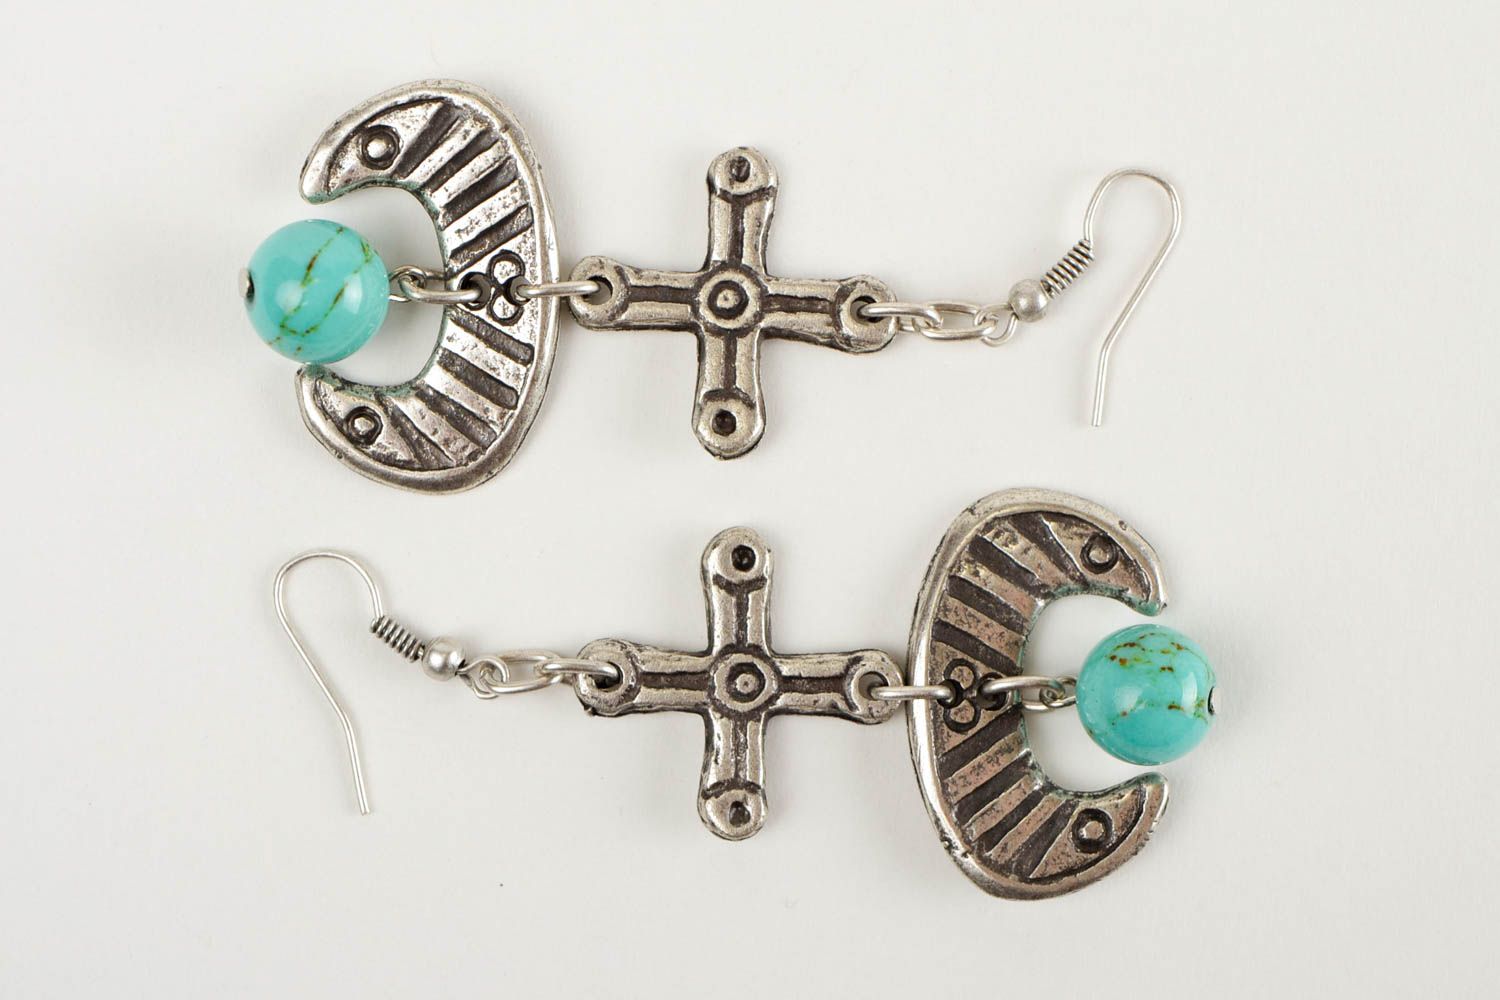 Long handcrafted earrings designer turquoise metal accessories women gift idea photo 3